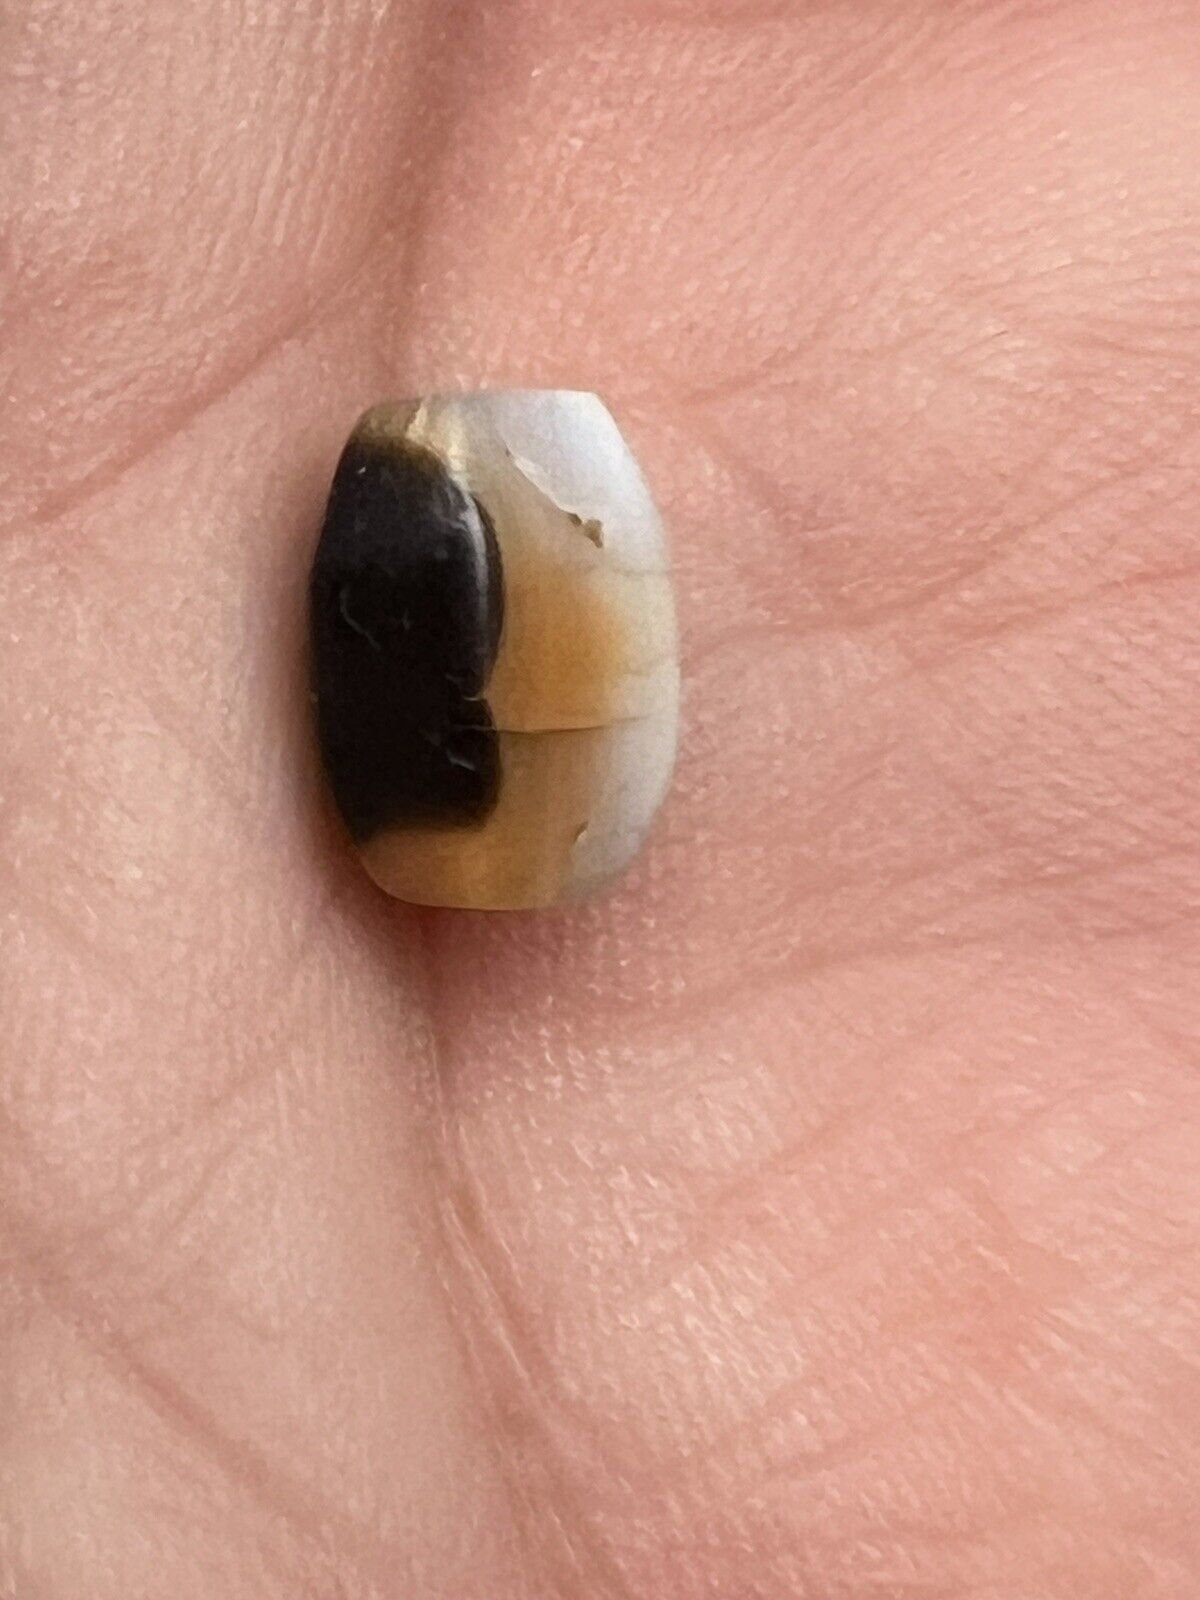 Ancient Tricolor Chung Faceted EYE Bead 8.9 x 7.4 x 5.7 mm collectible artifact